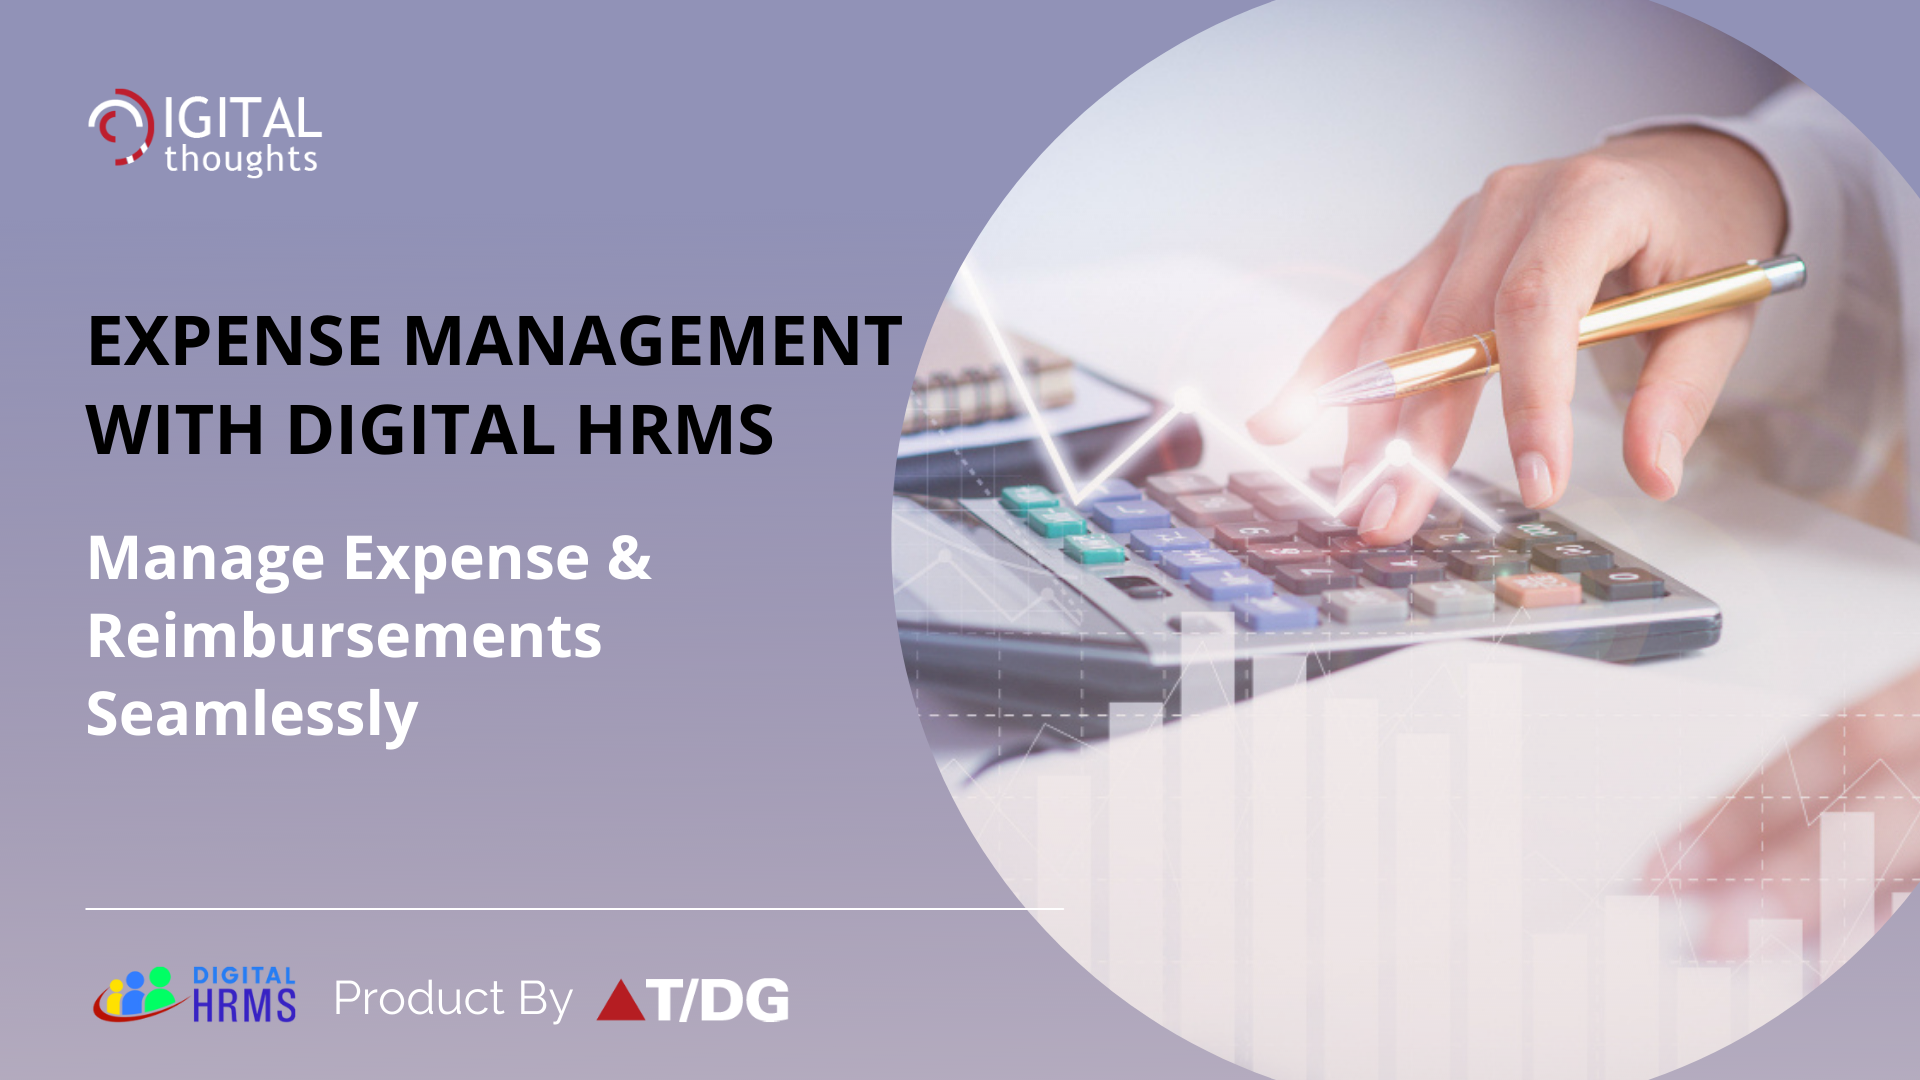 Expense Management with Digital HRMS: Discover a Seamless Way to Manage Expense & Reimbursements